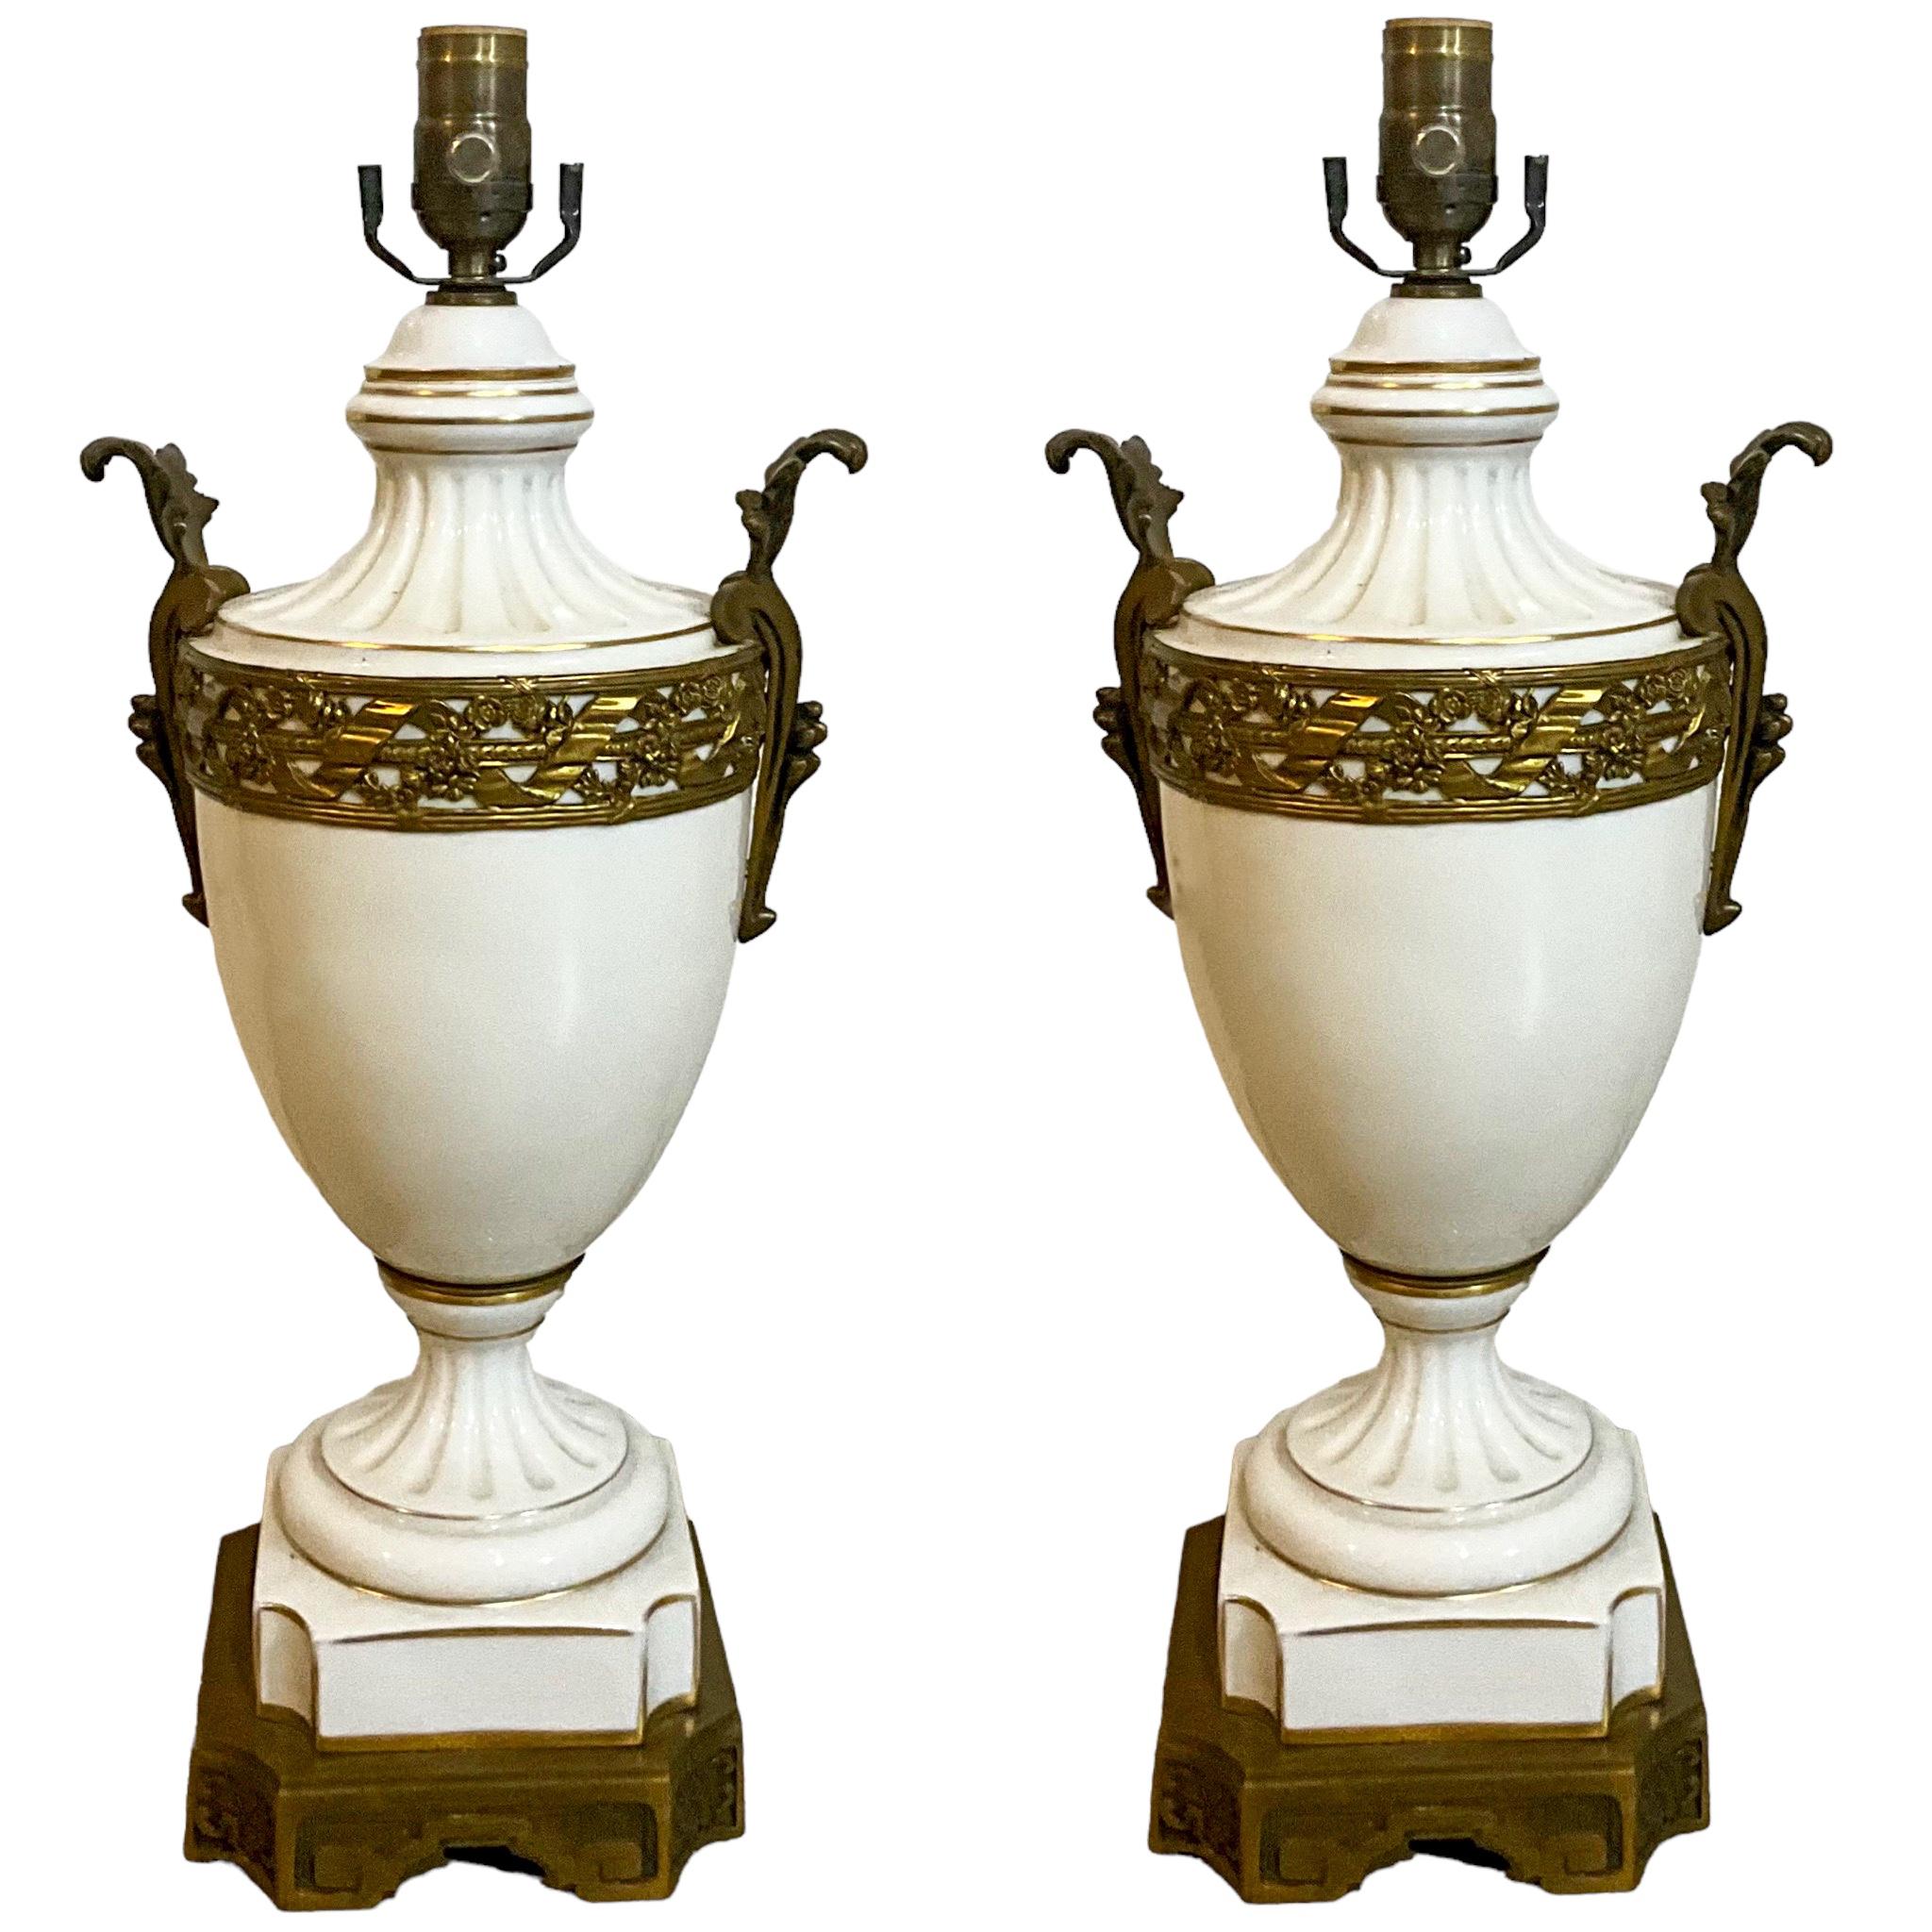 19th-C. French Neo-Classical Style Porcelain & Gilt Bronze Table Lamps - Pair For Sale 1